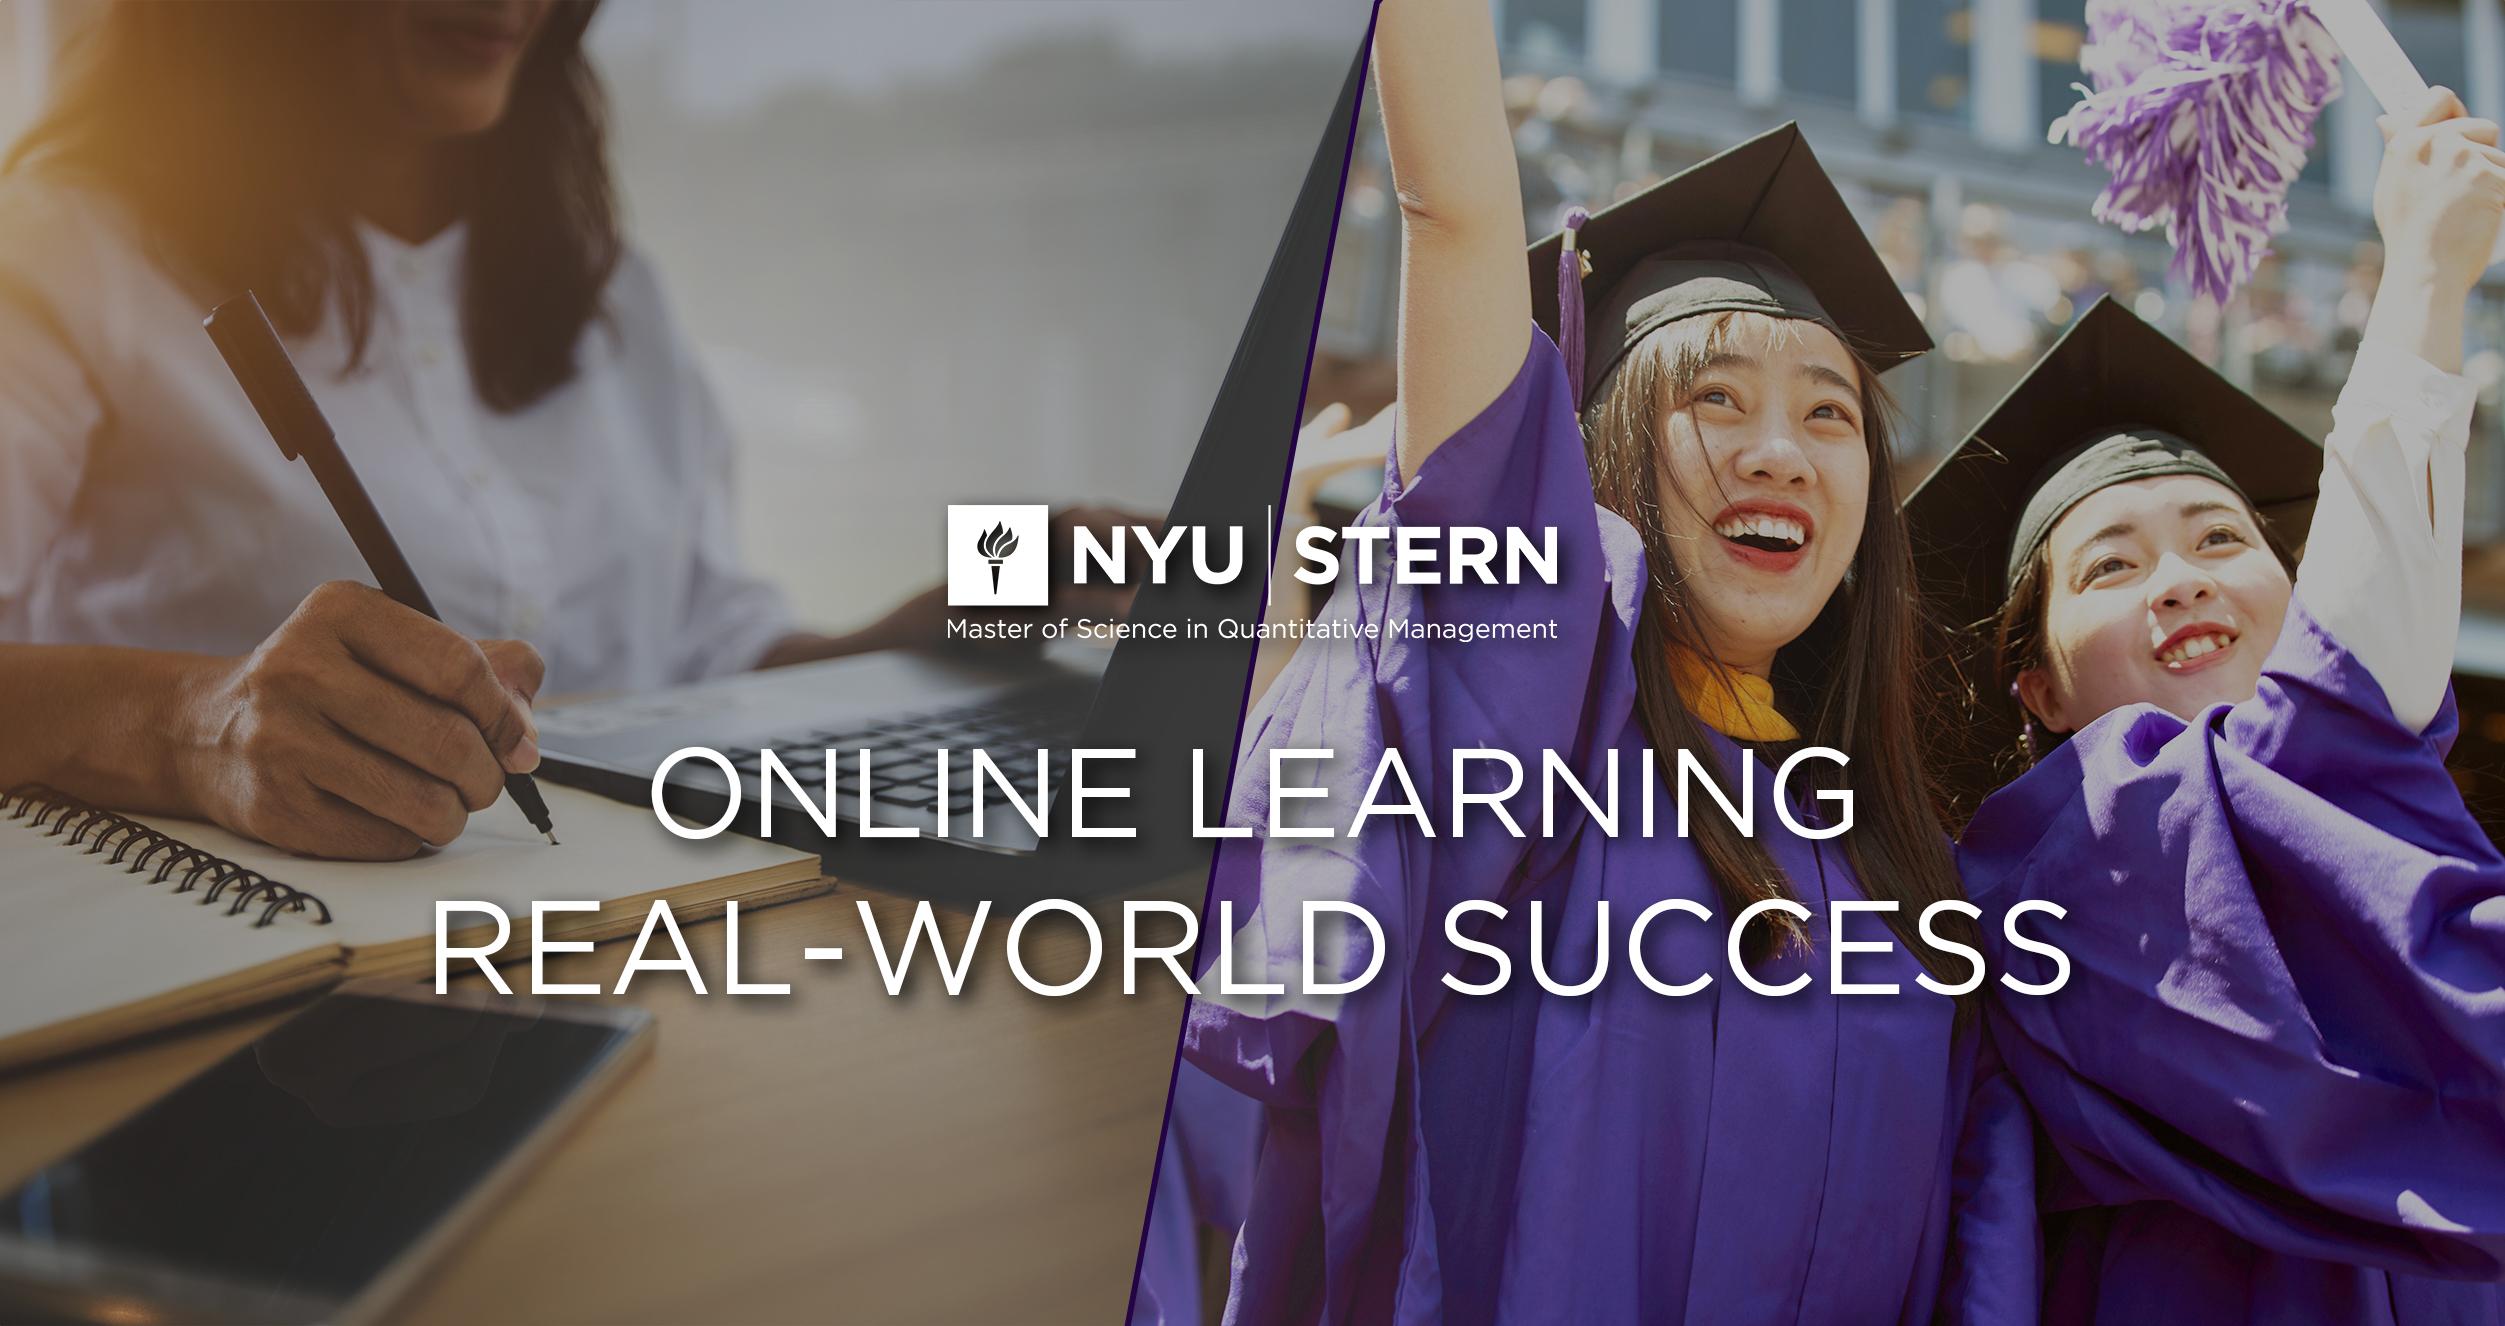 Slogan says online learning, real-world success, showing a remote student's laptop on the left side and a couple of graduates on the right side